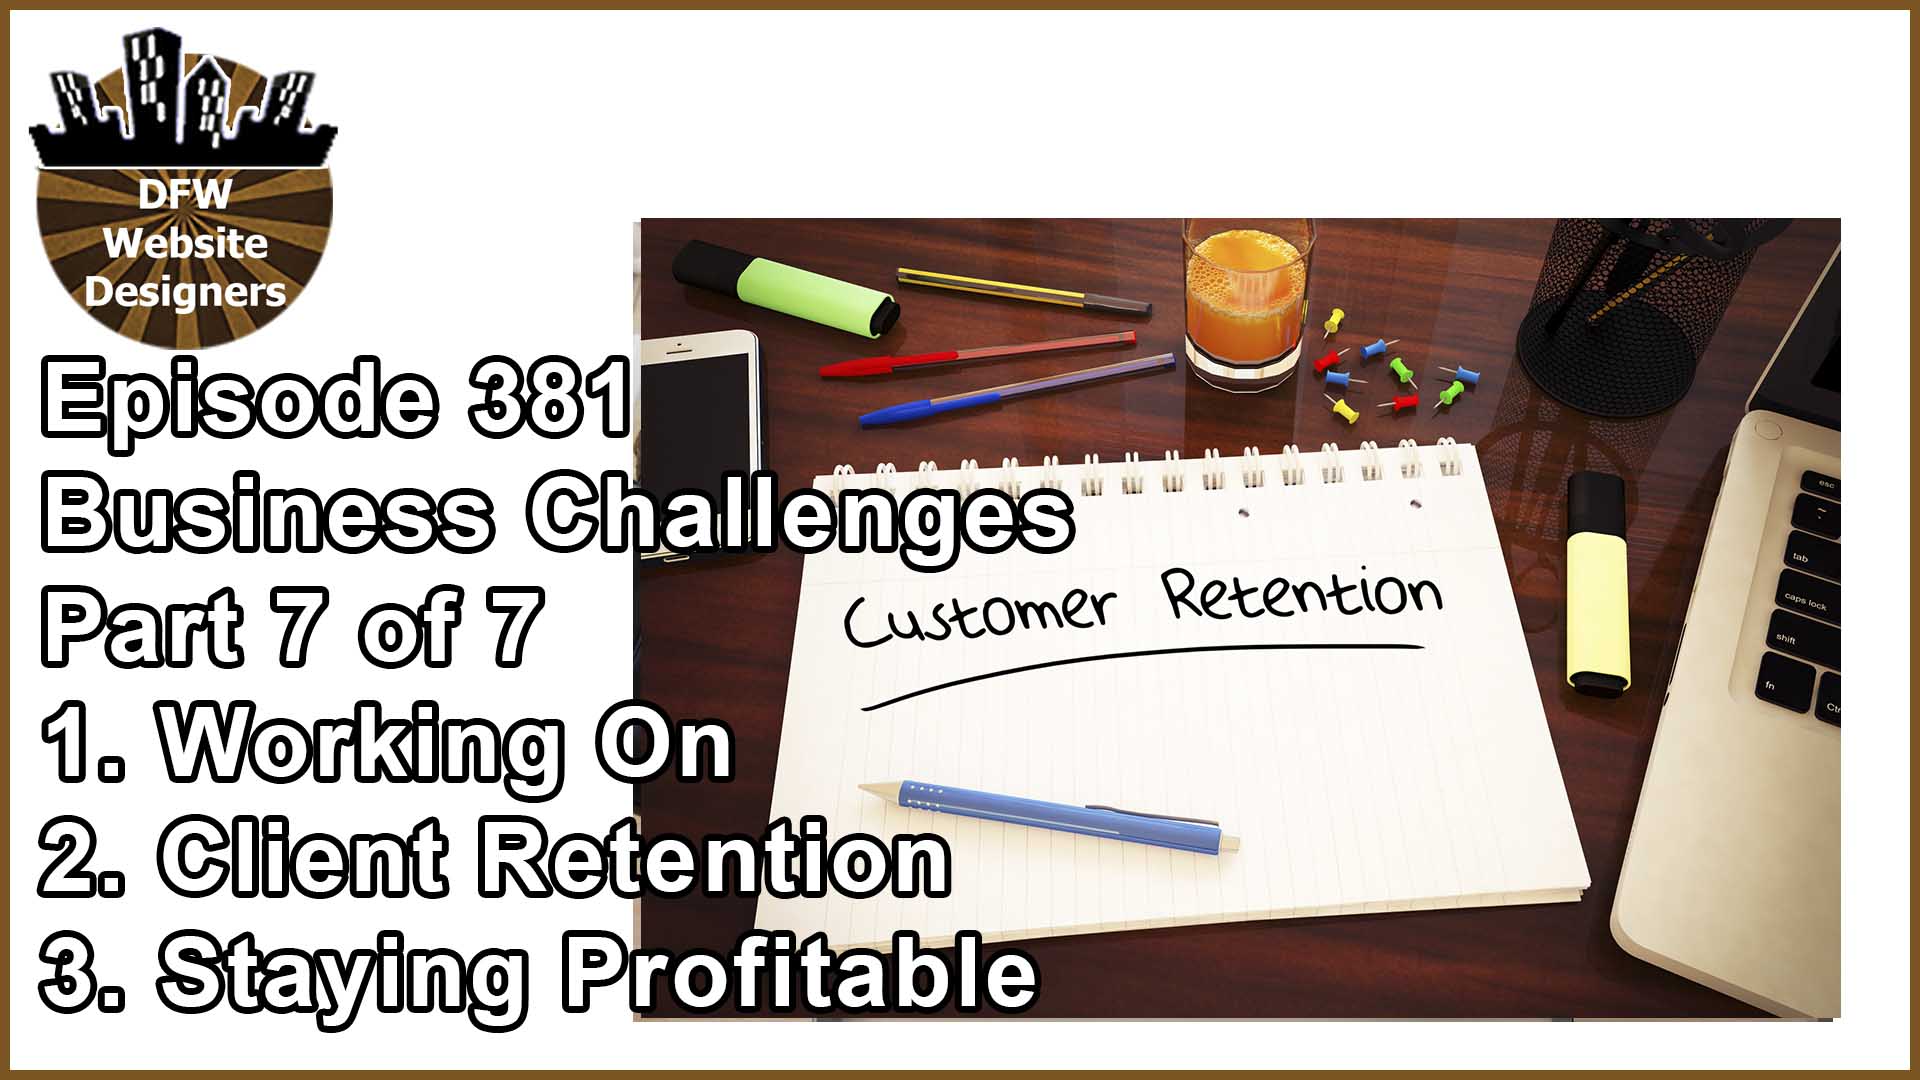 Episode 381 Business Challenges Pt7: Working On, Retention, Profitable